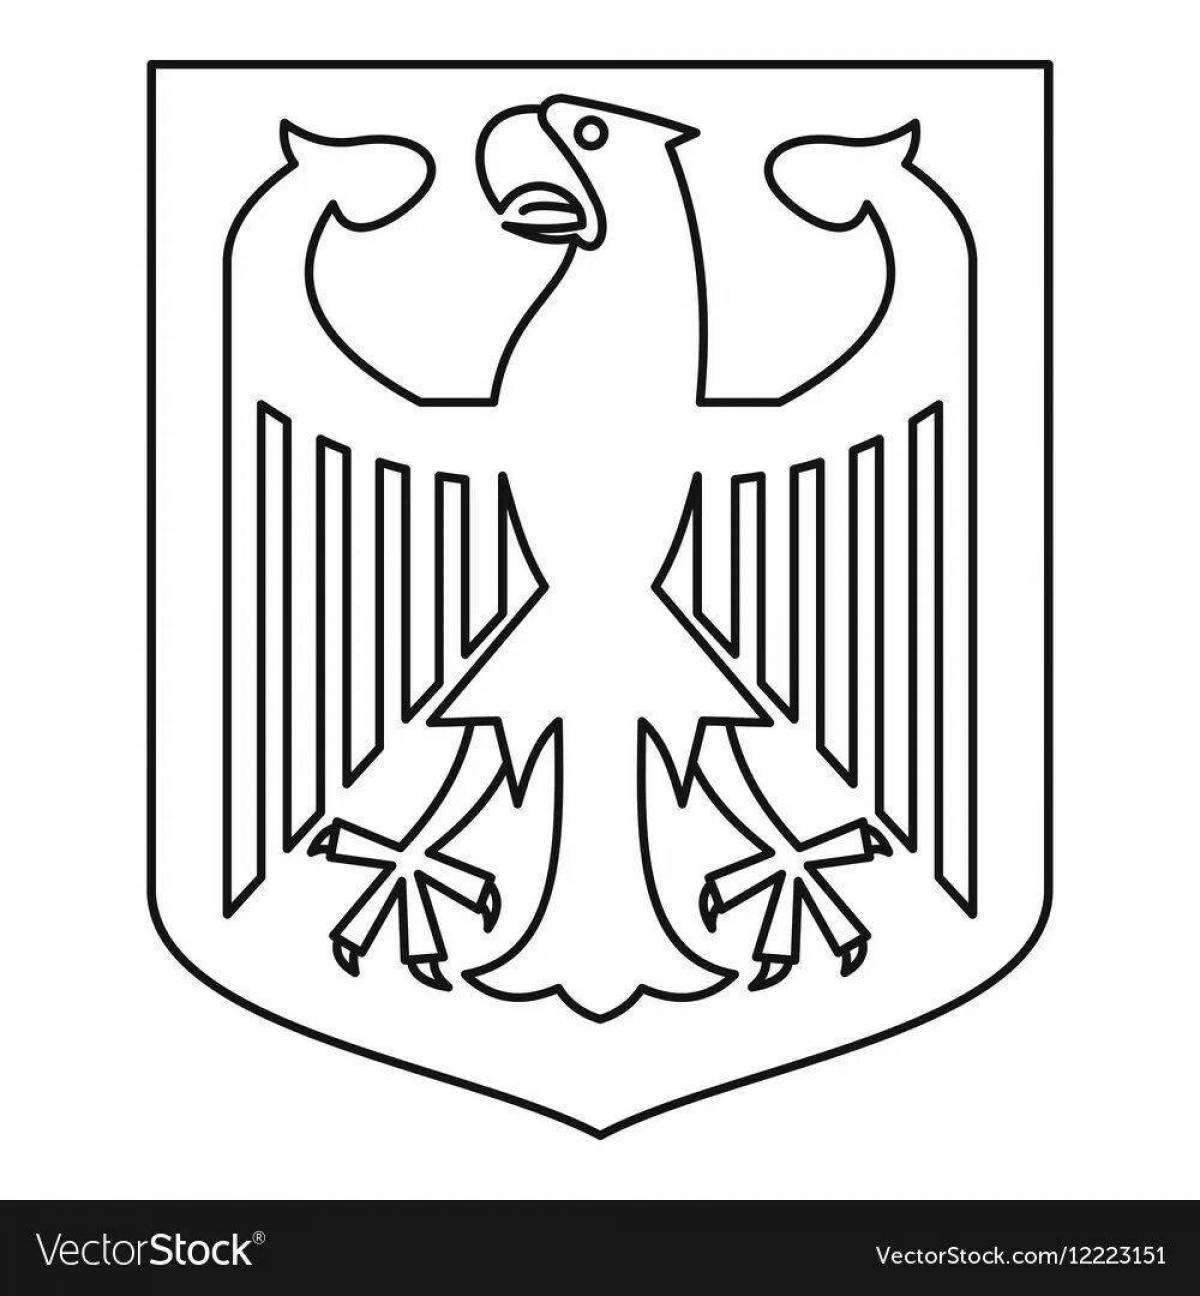 Dazzling German flag coloring page